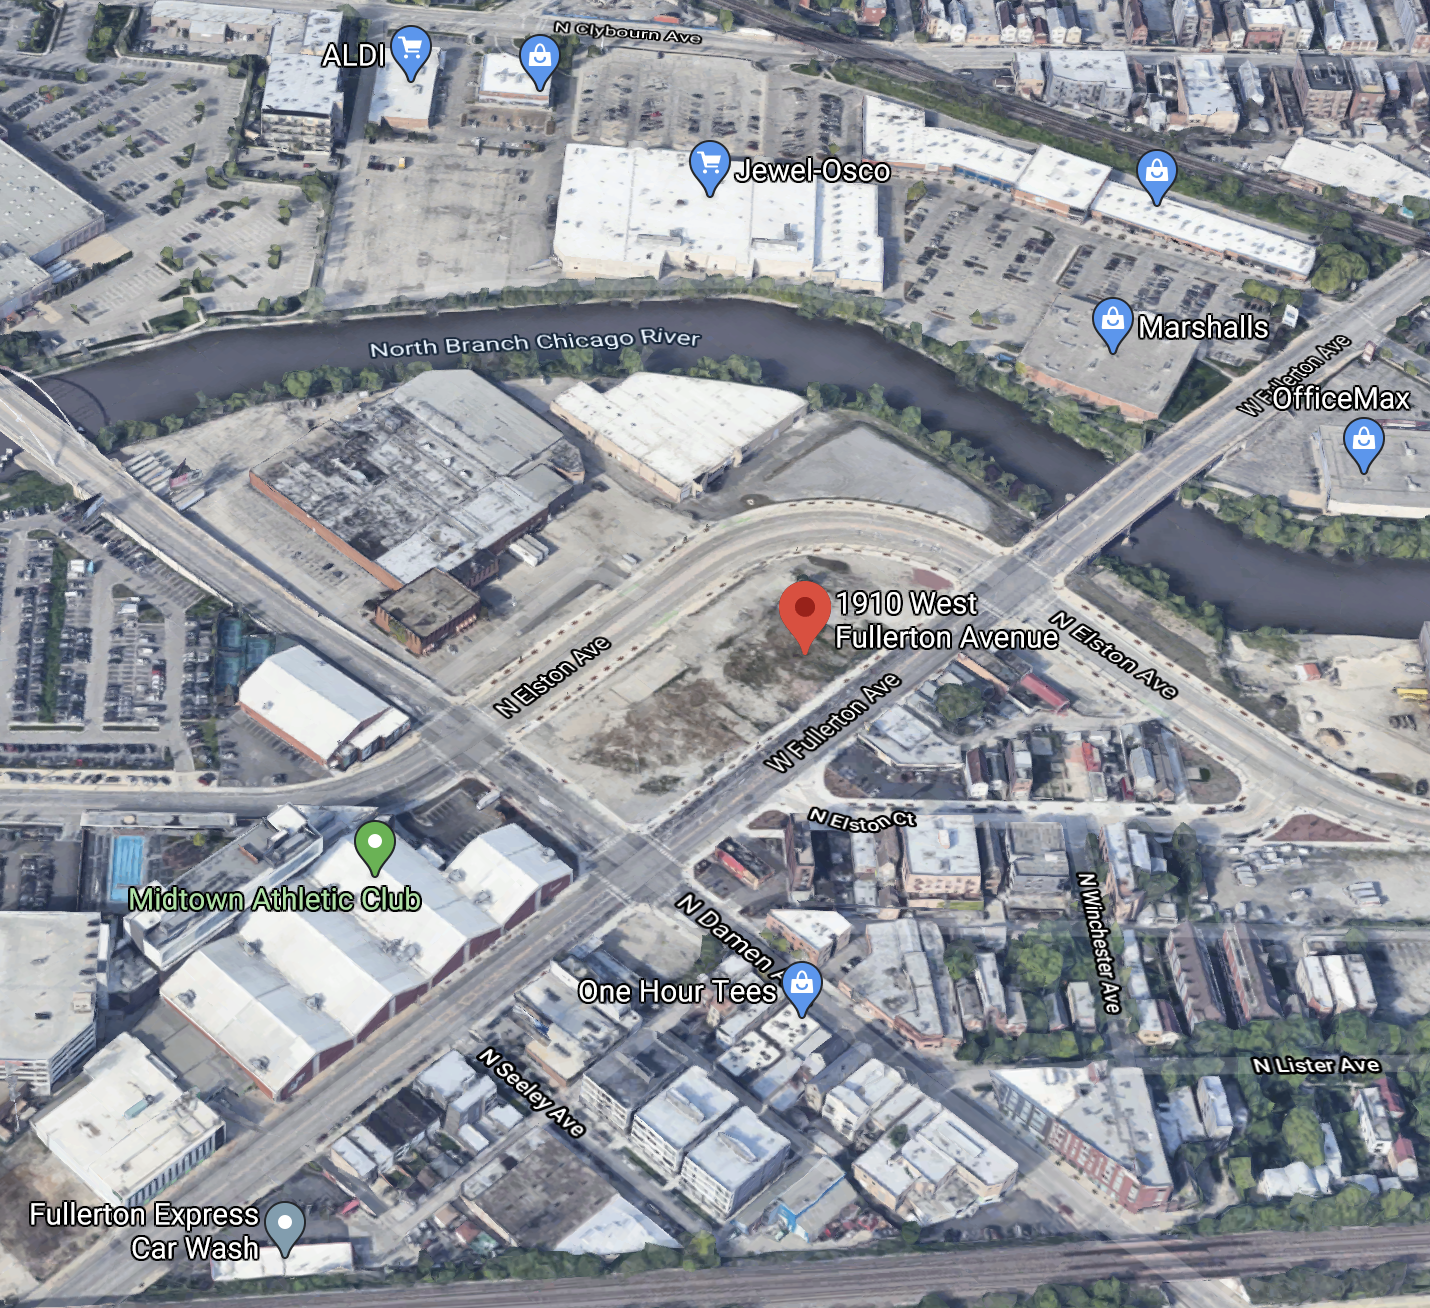 Aerial view of the address within the larger lot by the Chicago River